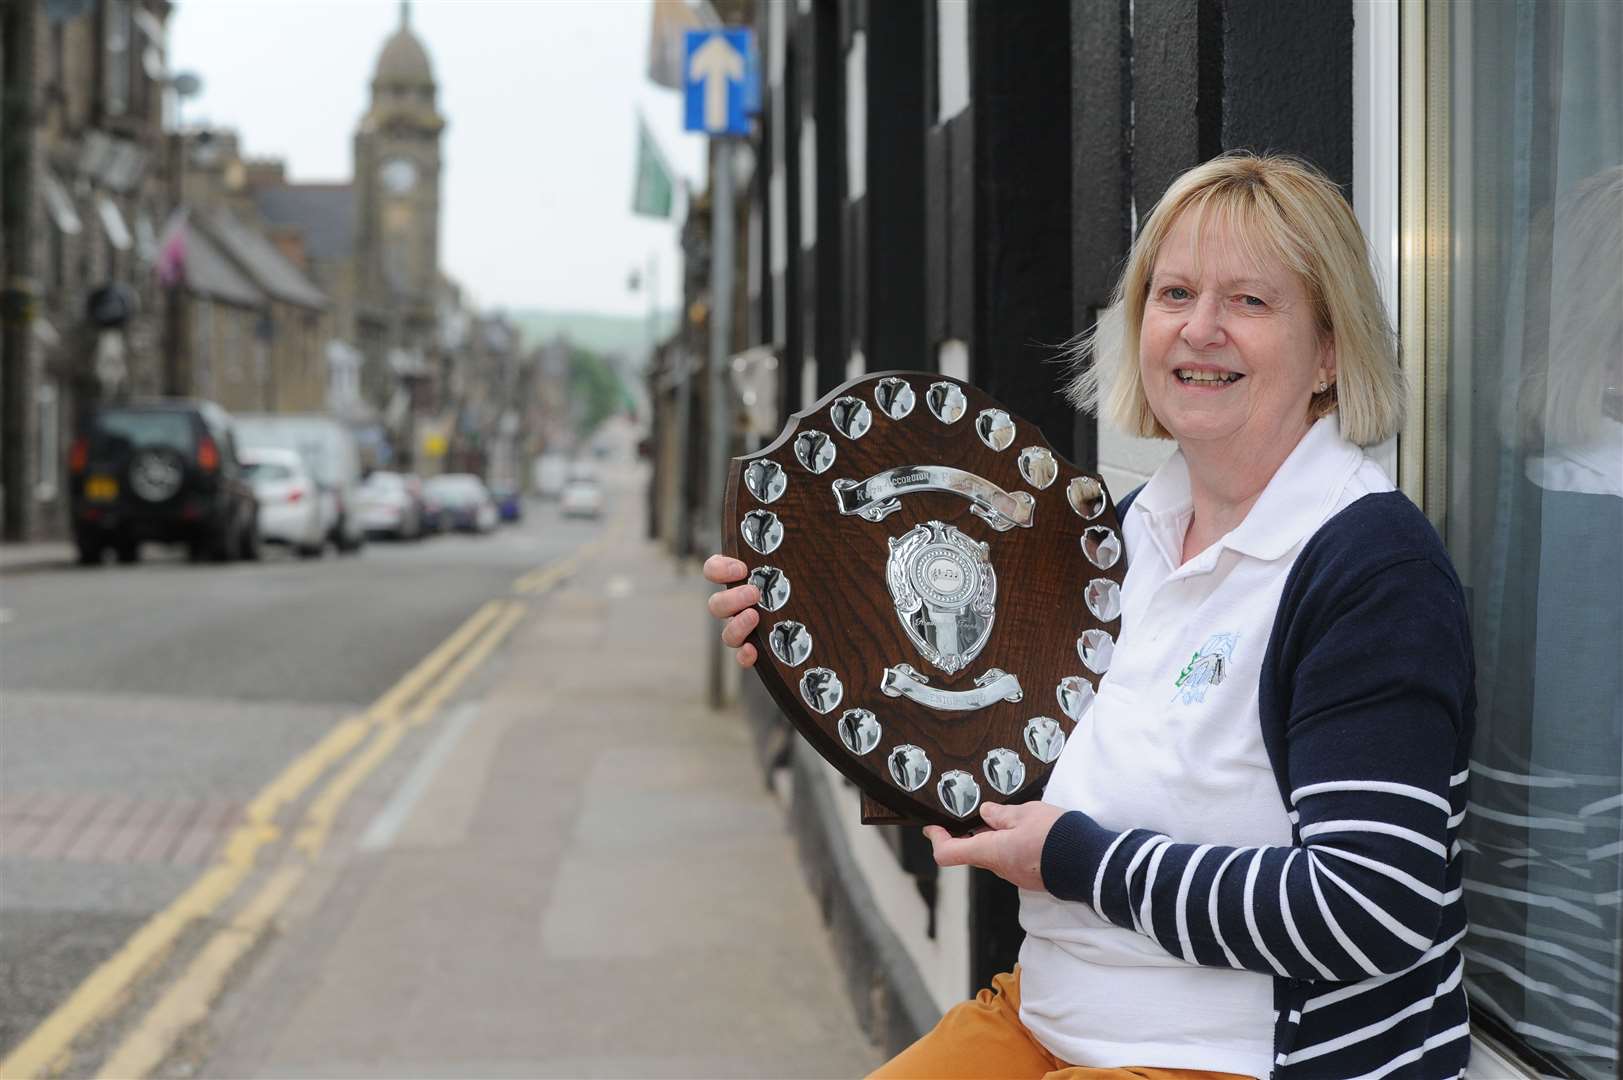 Picture: Eric Cormack. Image No.041146. CHAIR OF THE KEITH MUSIC FESTIVAL KATHLEEN ANDERSON WITH THE WALTER RUTHERFORD TROPHY.